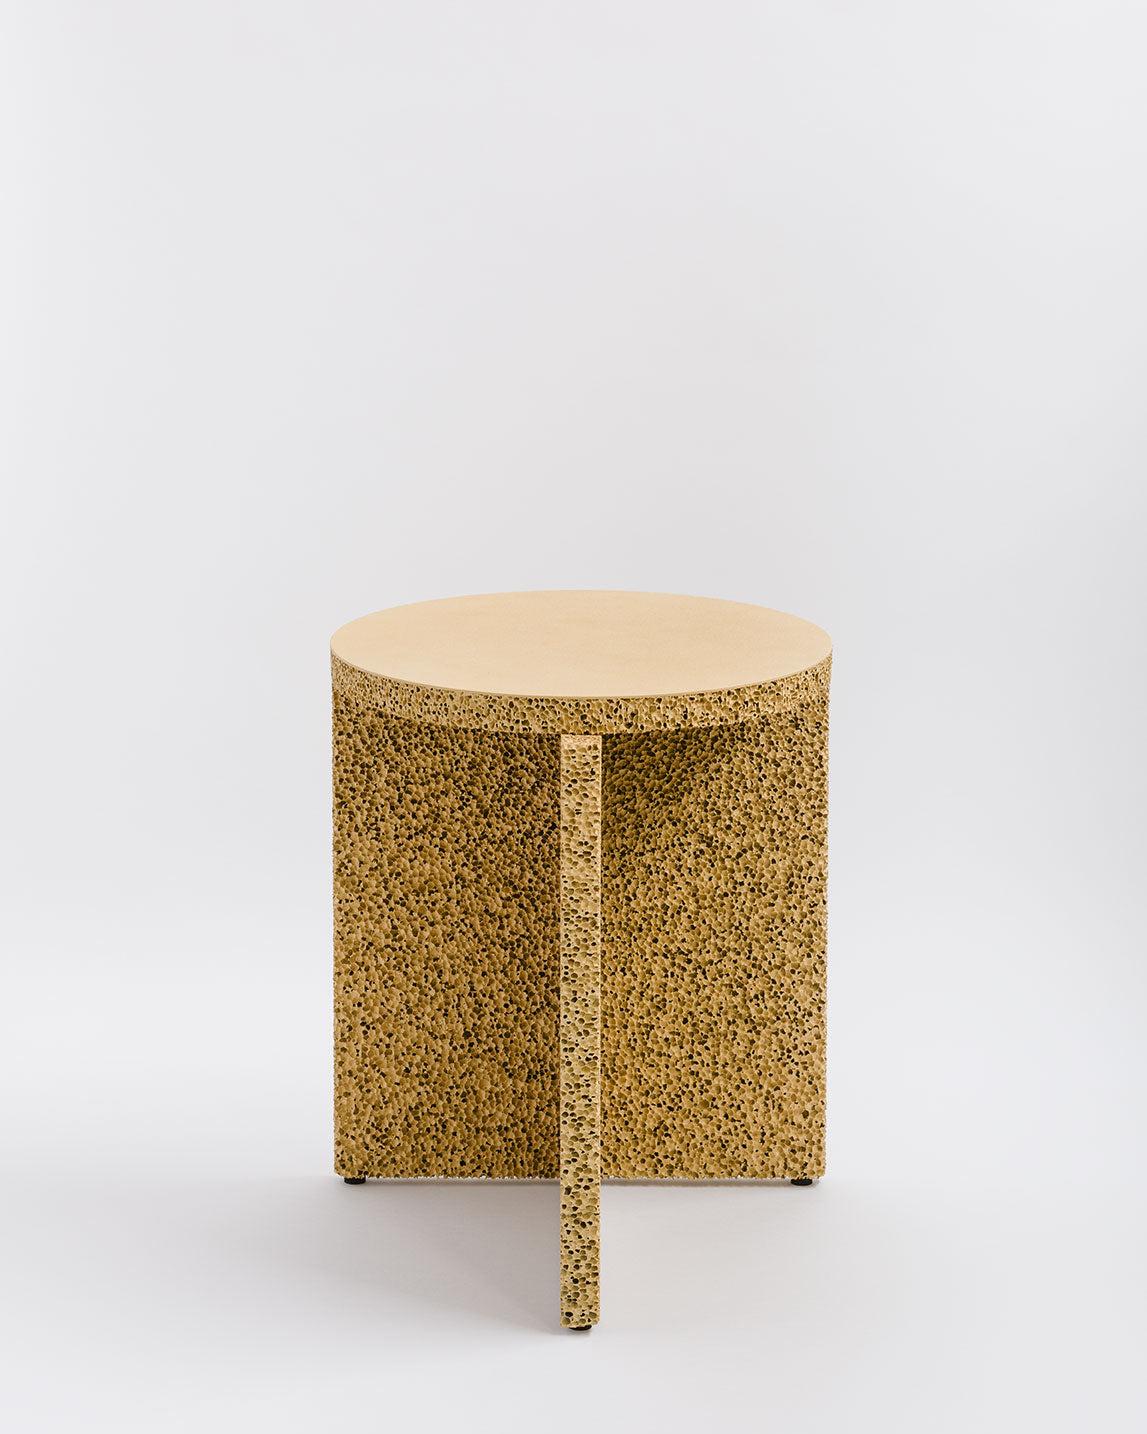 Small Natural Sea Sponge table by Calen Knauf
Dimensions: D 40 x W 35 x H 35 cm
Materials: Painted Aluminum
Also Available: Custom colours and sizes are possible.

The Sponge Table is a sculptural side table made from carbonated aluminum panel.